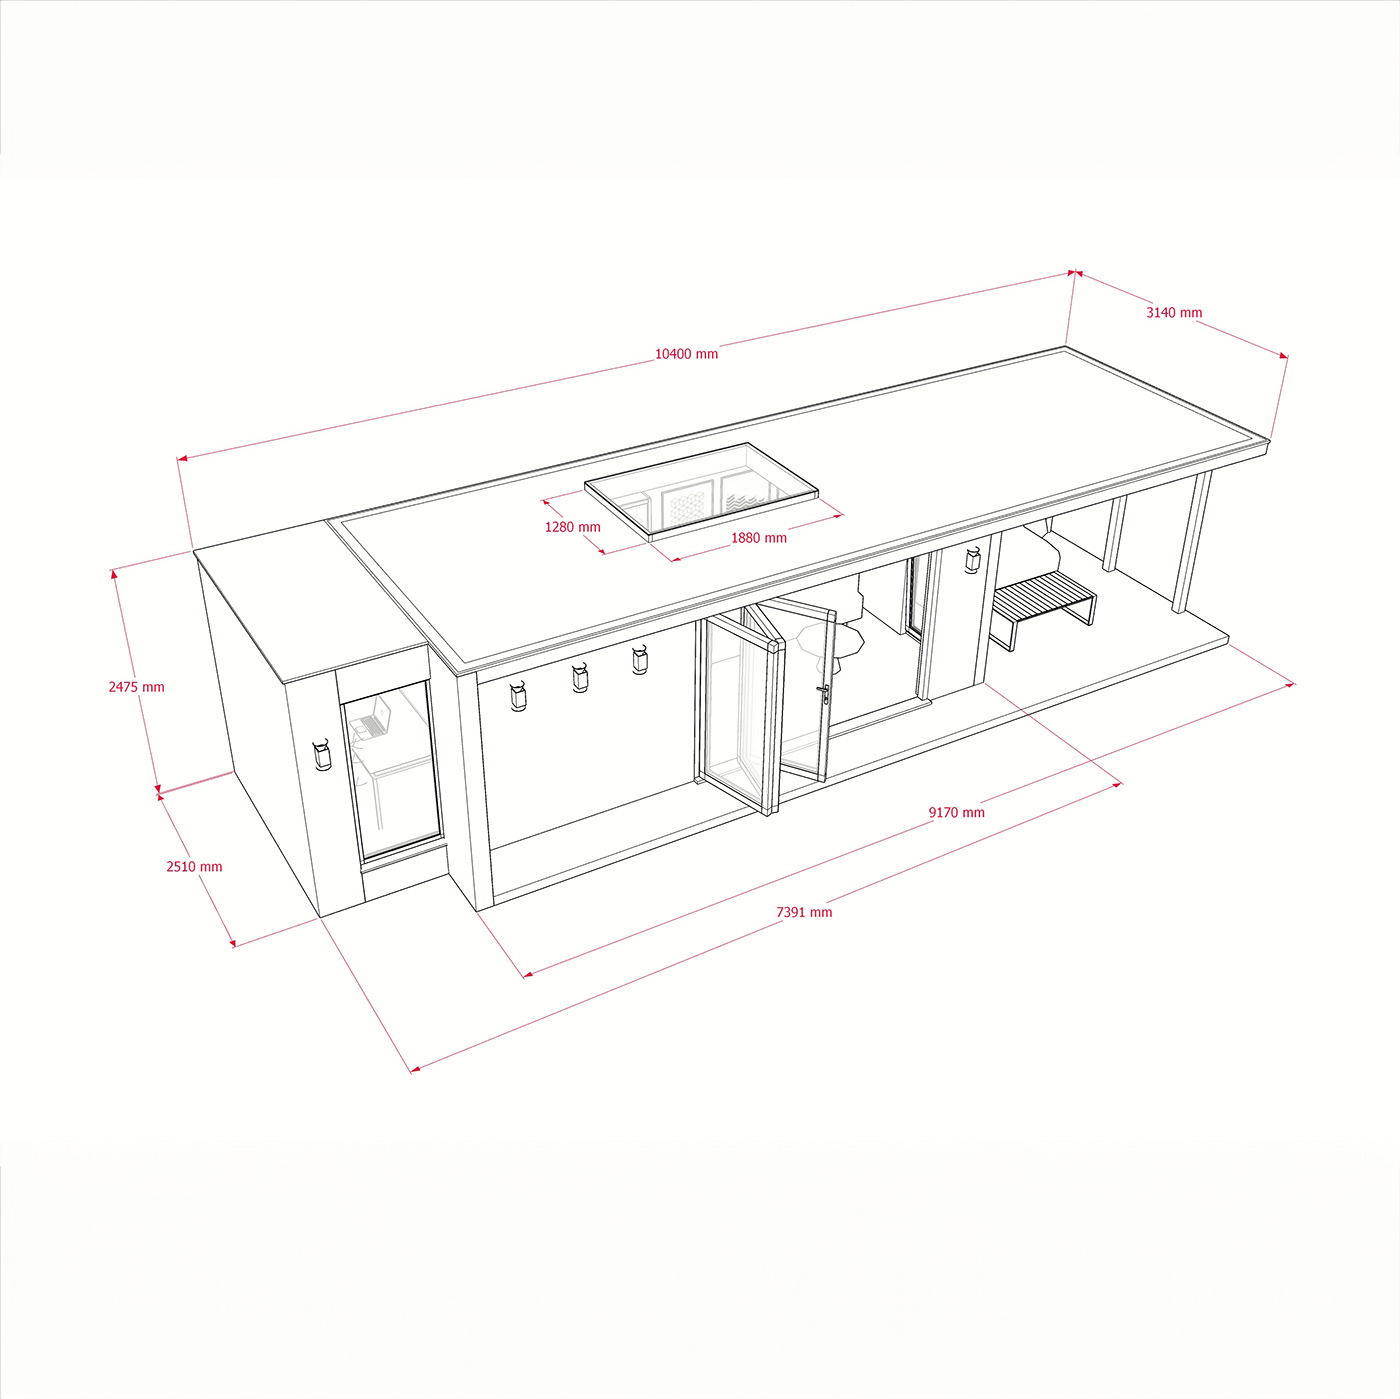 Exterior dimensions for 2.6m by 7.4m garden room